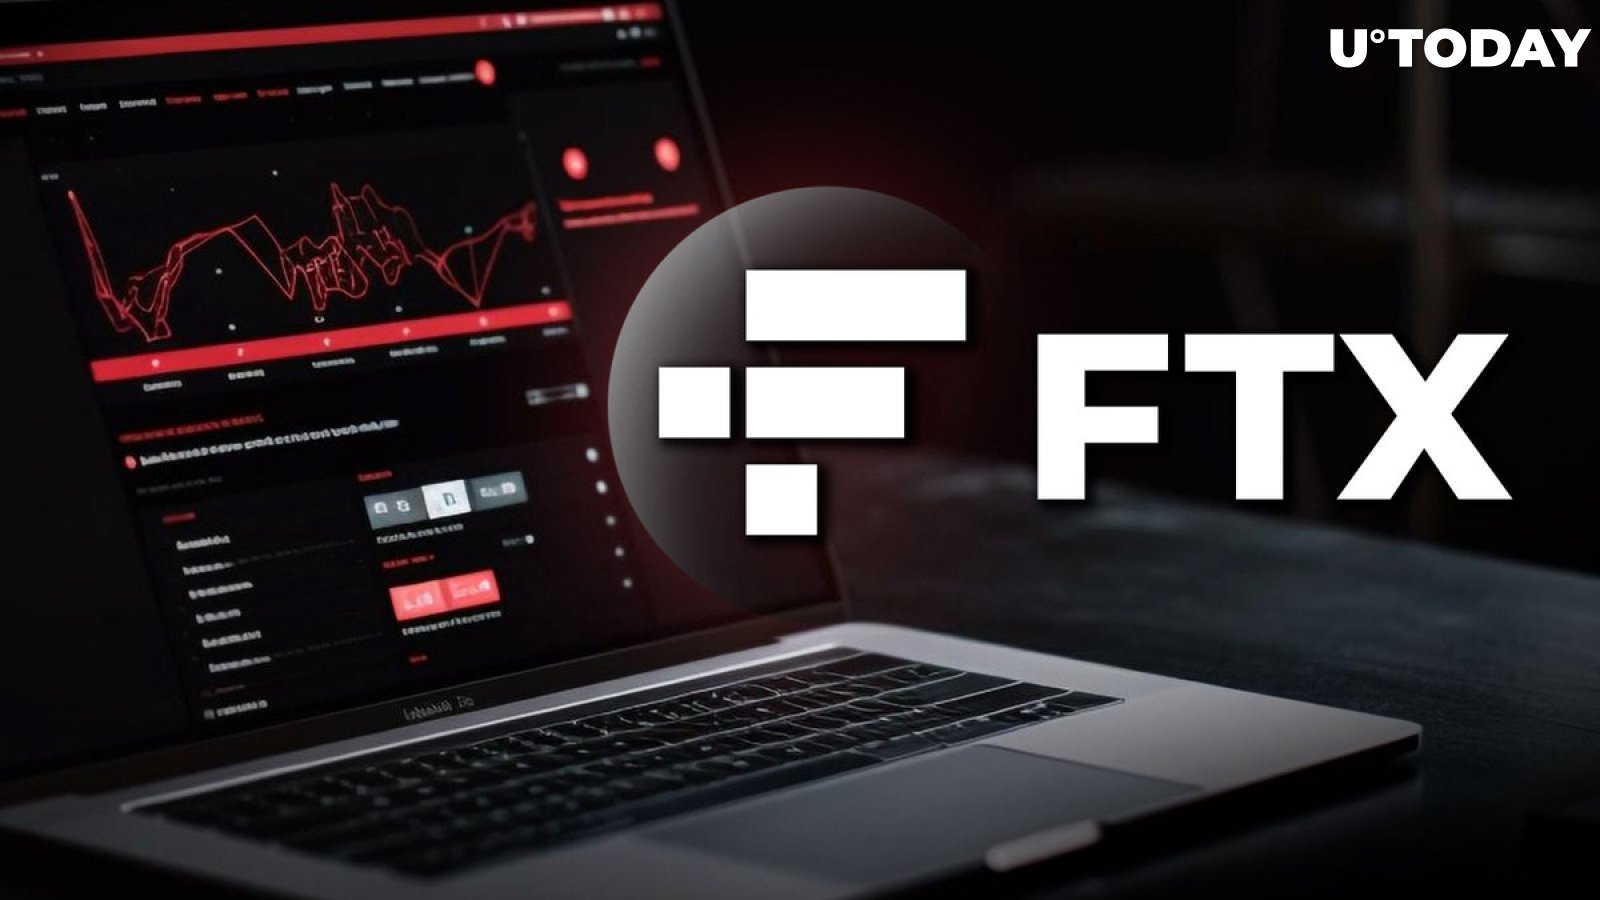 FTX Attacker Shifts Bitcoin (BTC) in Most Sinister Way